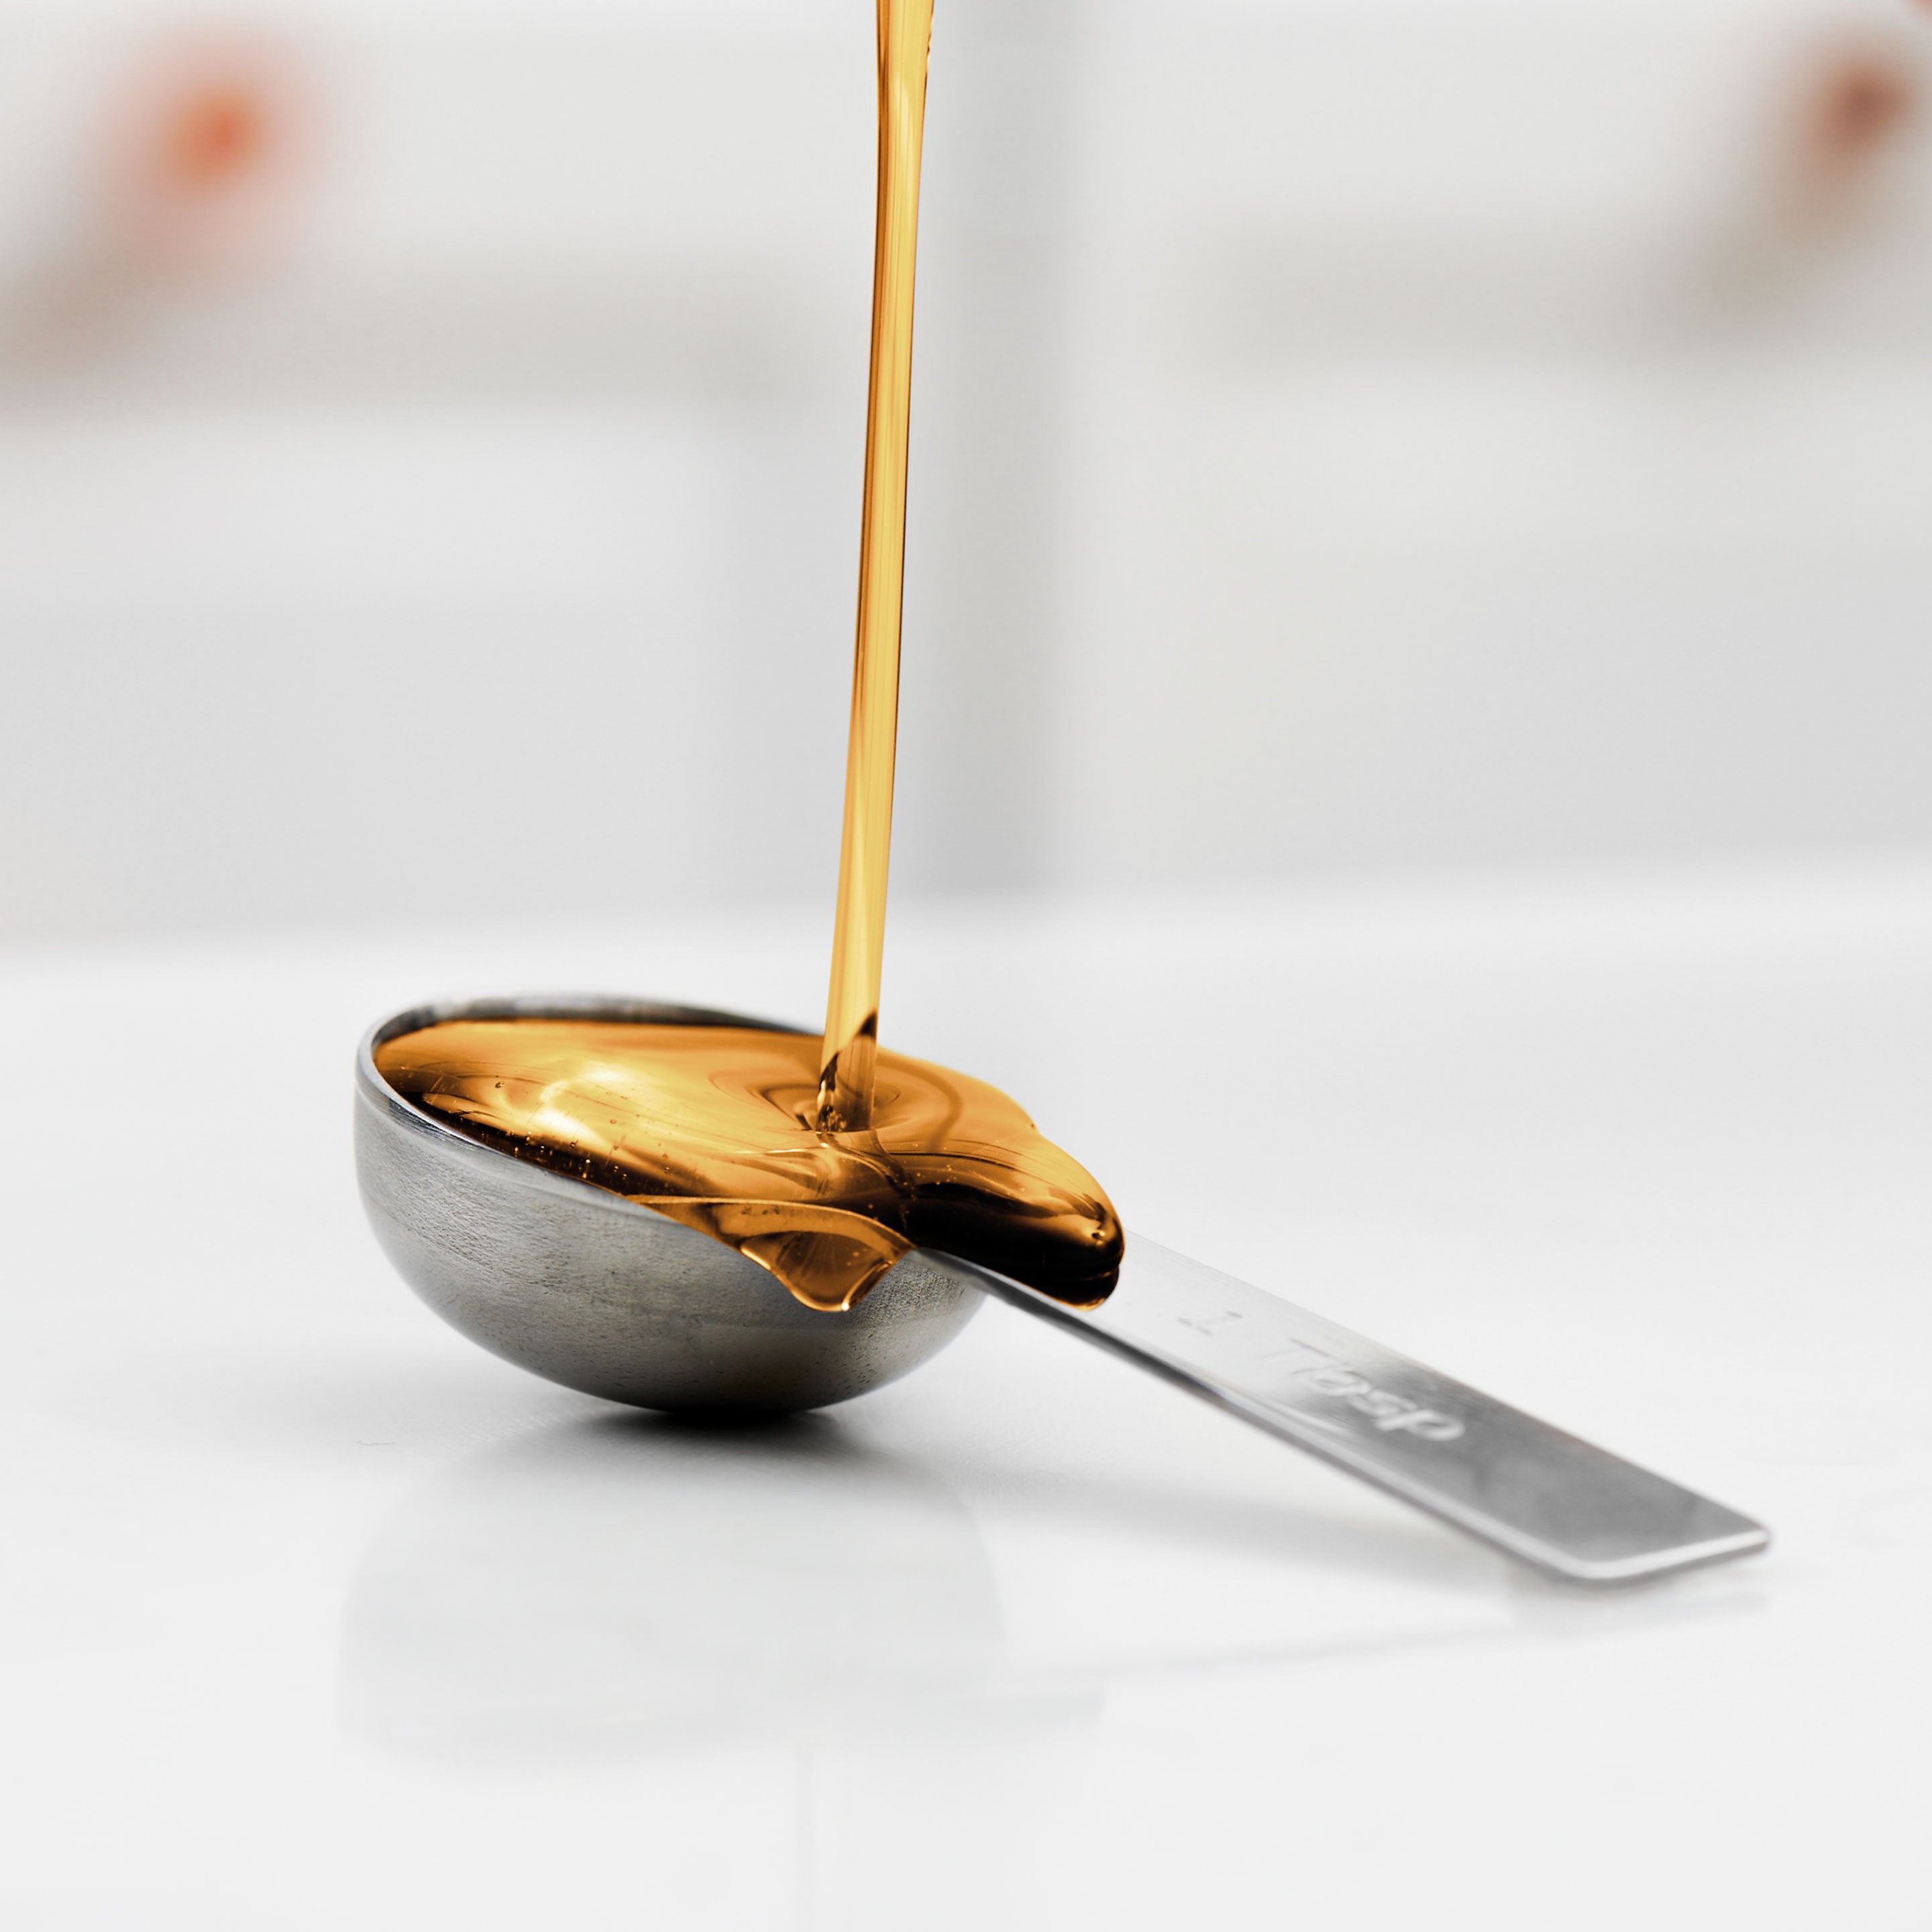 Vanilla syrup pours into spoon